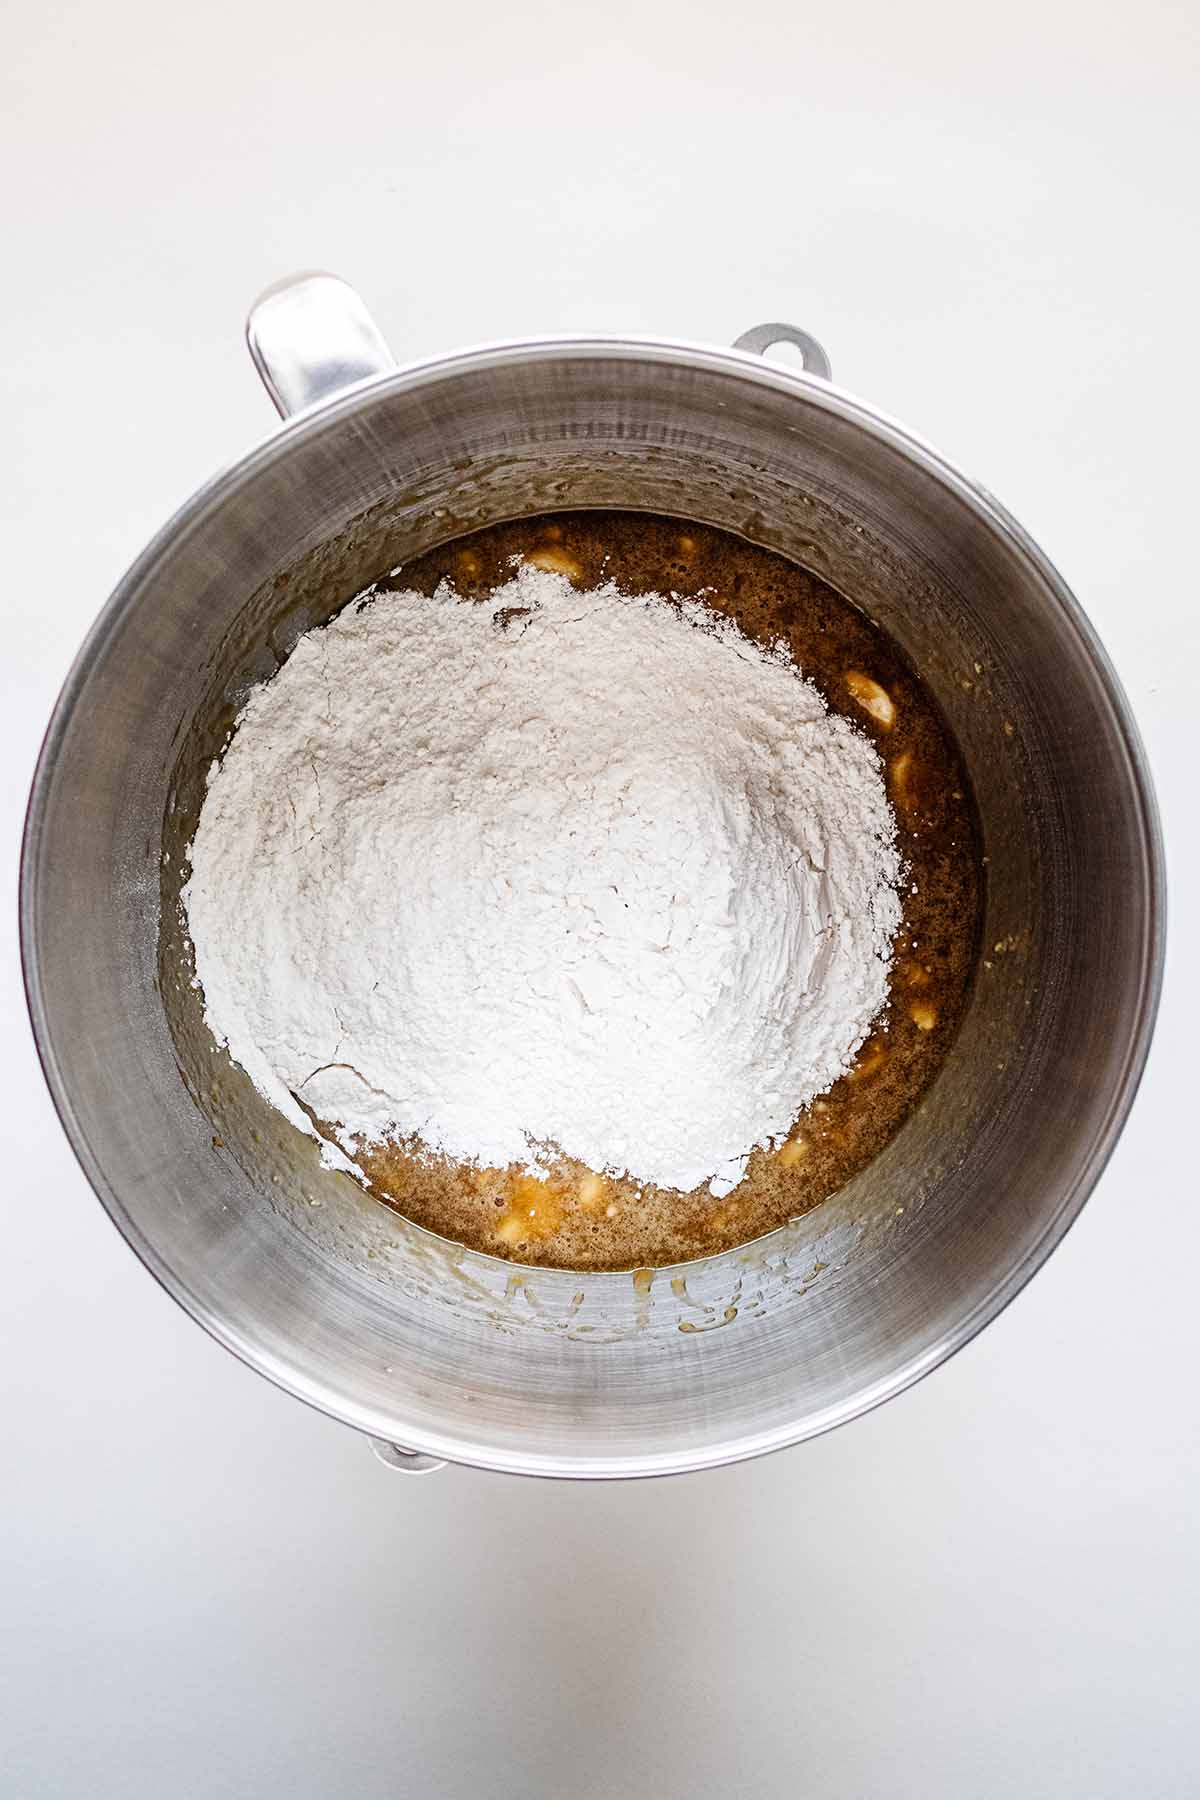 Flour with other ingredients in a stainless steel bowl.